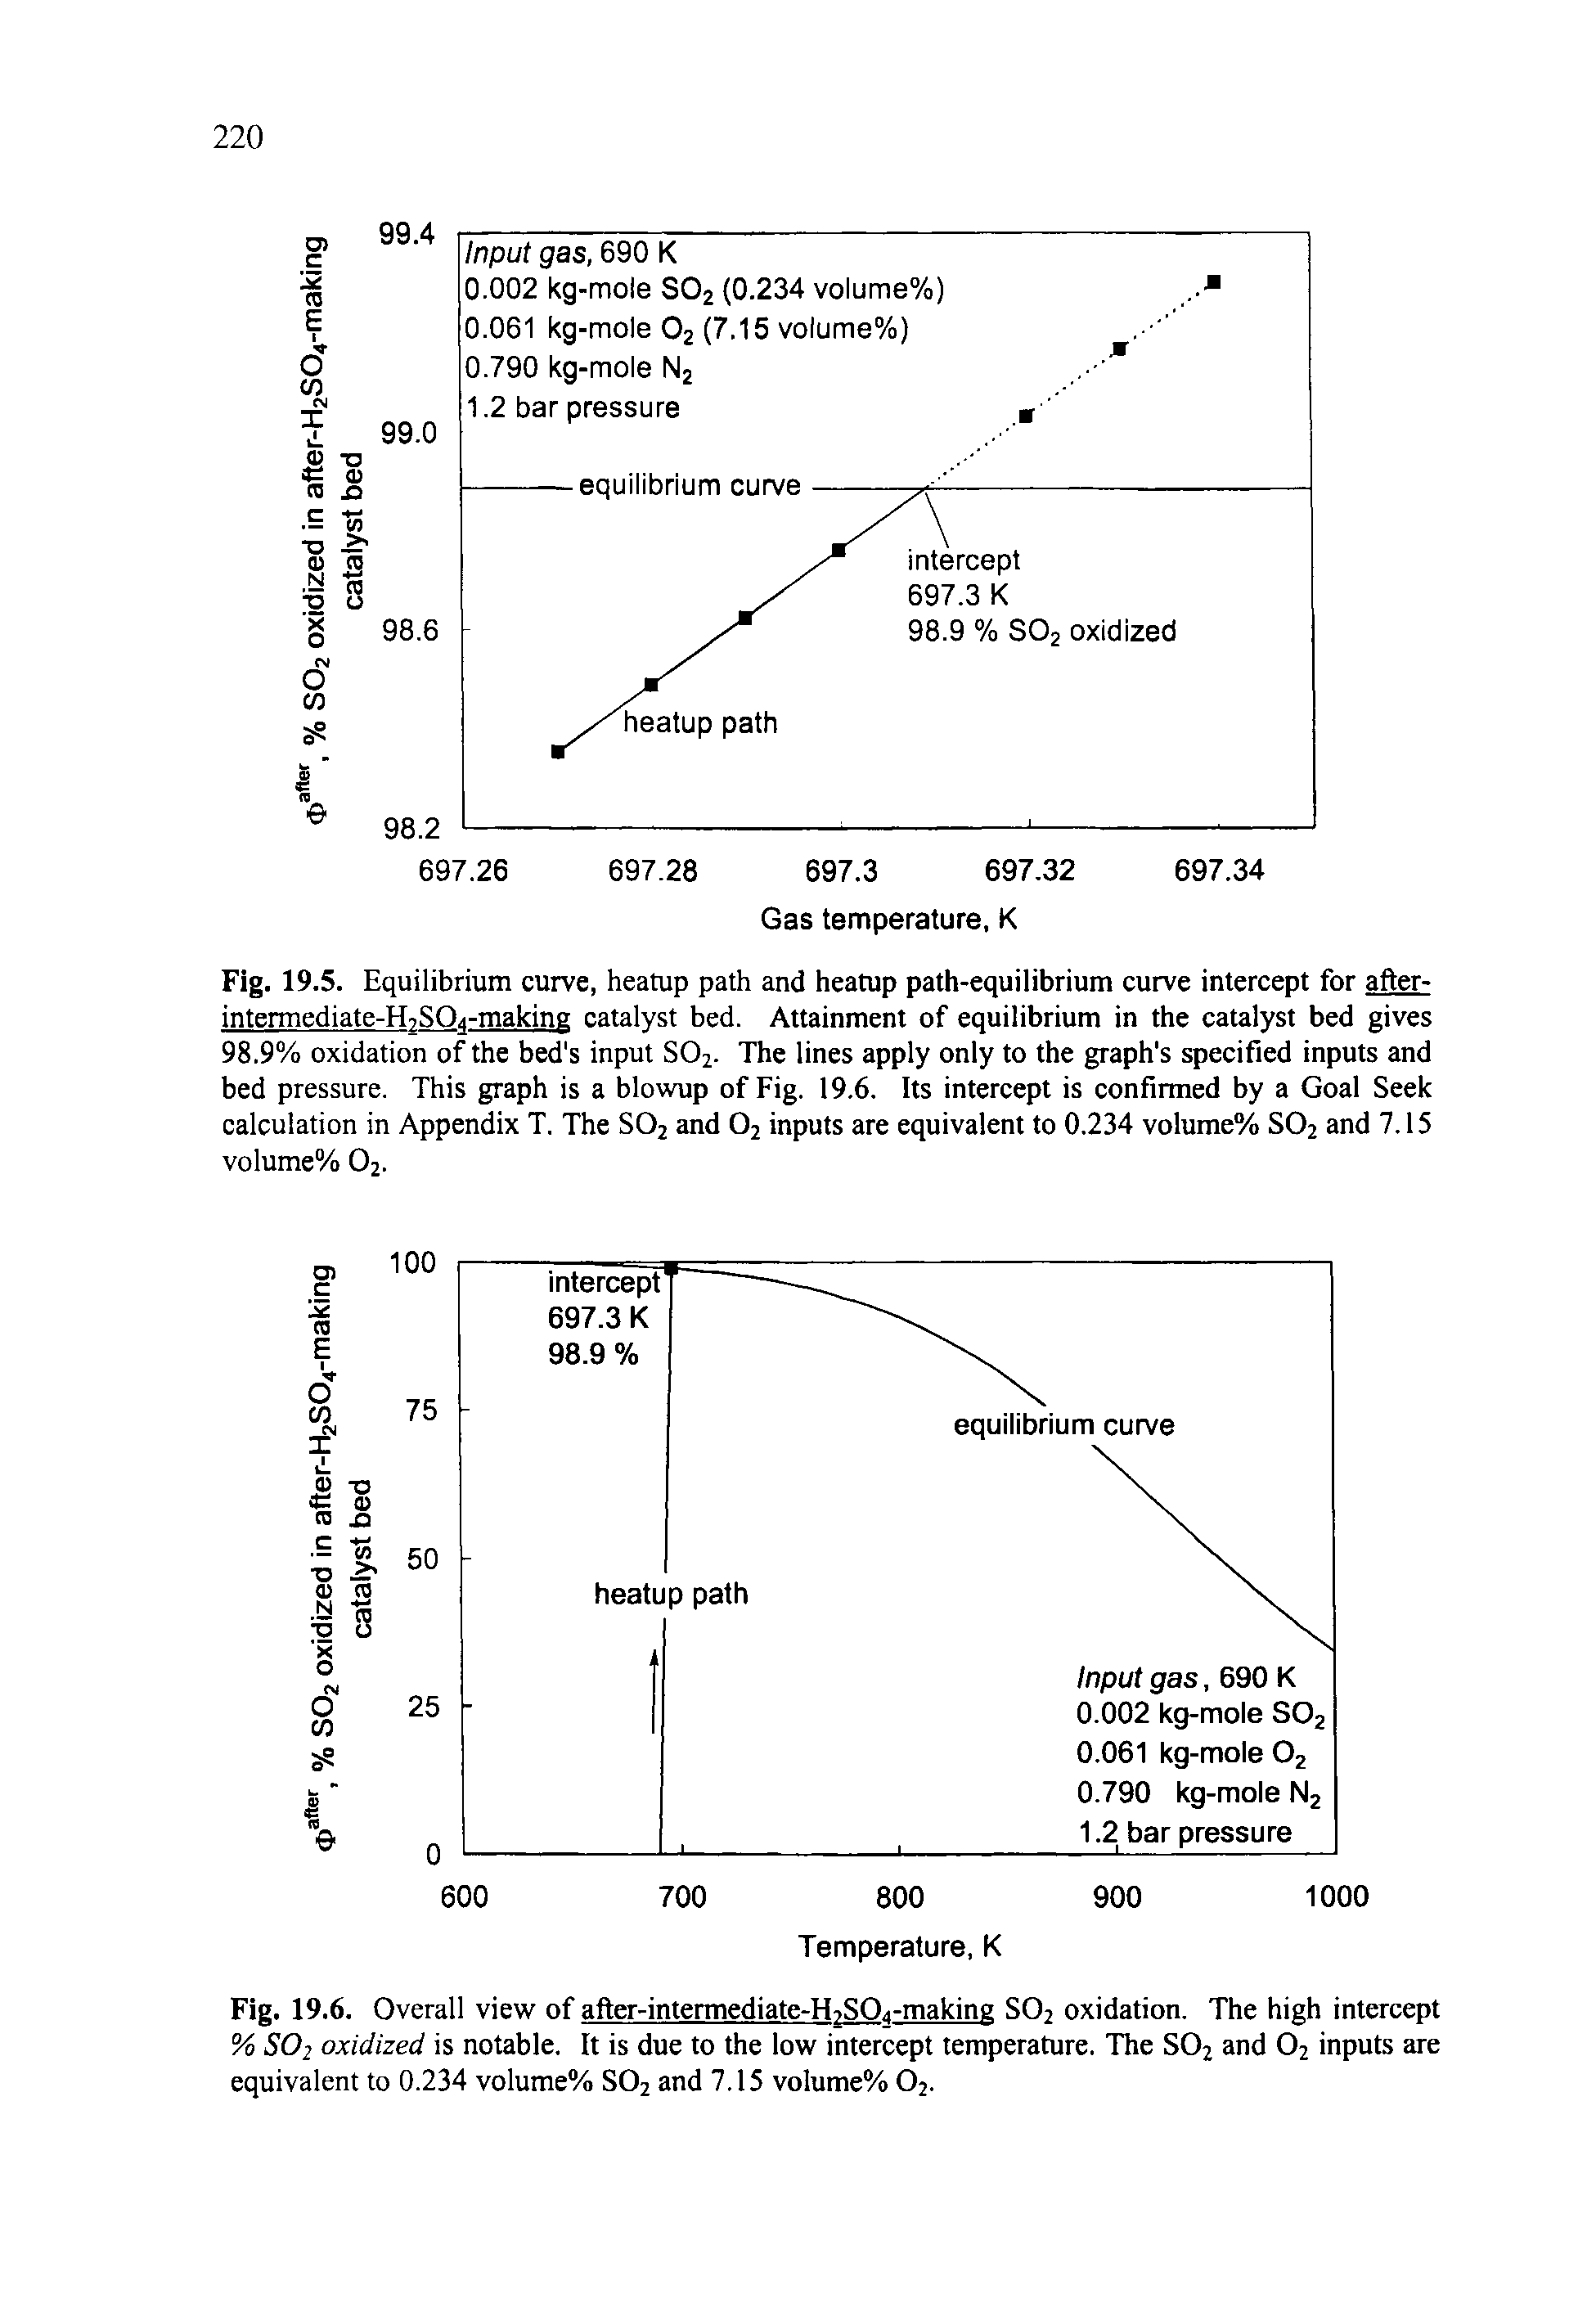 Fig. 19.5. Equilibrium curve, heatup path and heatup path-equilibrium curve intercept for after-intermediate-FESOj-making catalyst bed. Attainment of equilibrium in the catalyst bed gives 98.9% oxidation of the bed s input S02. The lines apply only to the graph s specified inputs and bed pressure. This graph is a blowup of Fig. 19.6. Its intercept is confirmed by a Goal Seek calculation in Appendix T. The S02 and 02 inputs are equivalent to 0.234 volume% S02 and 7.15 volume% 02.